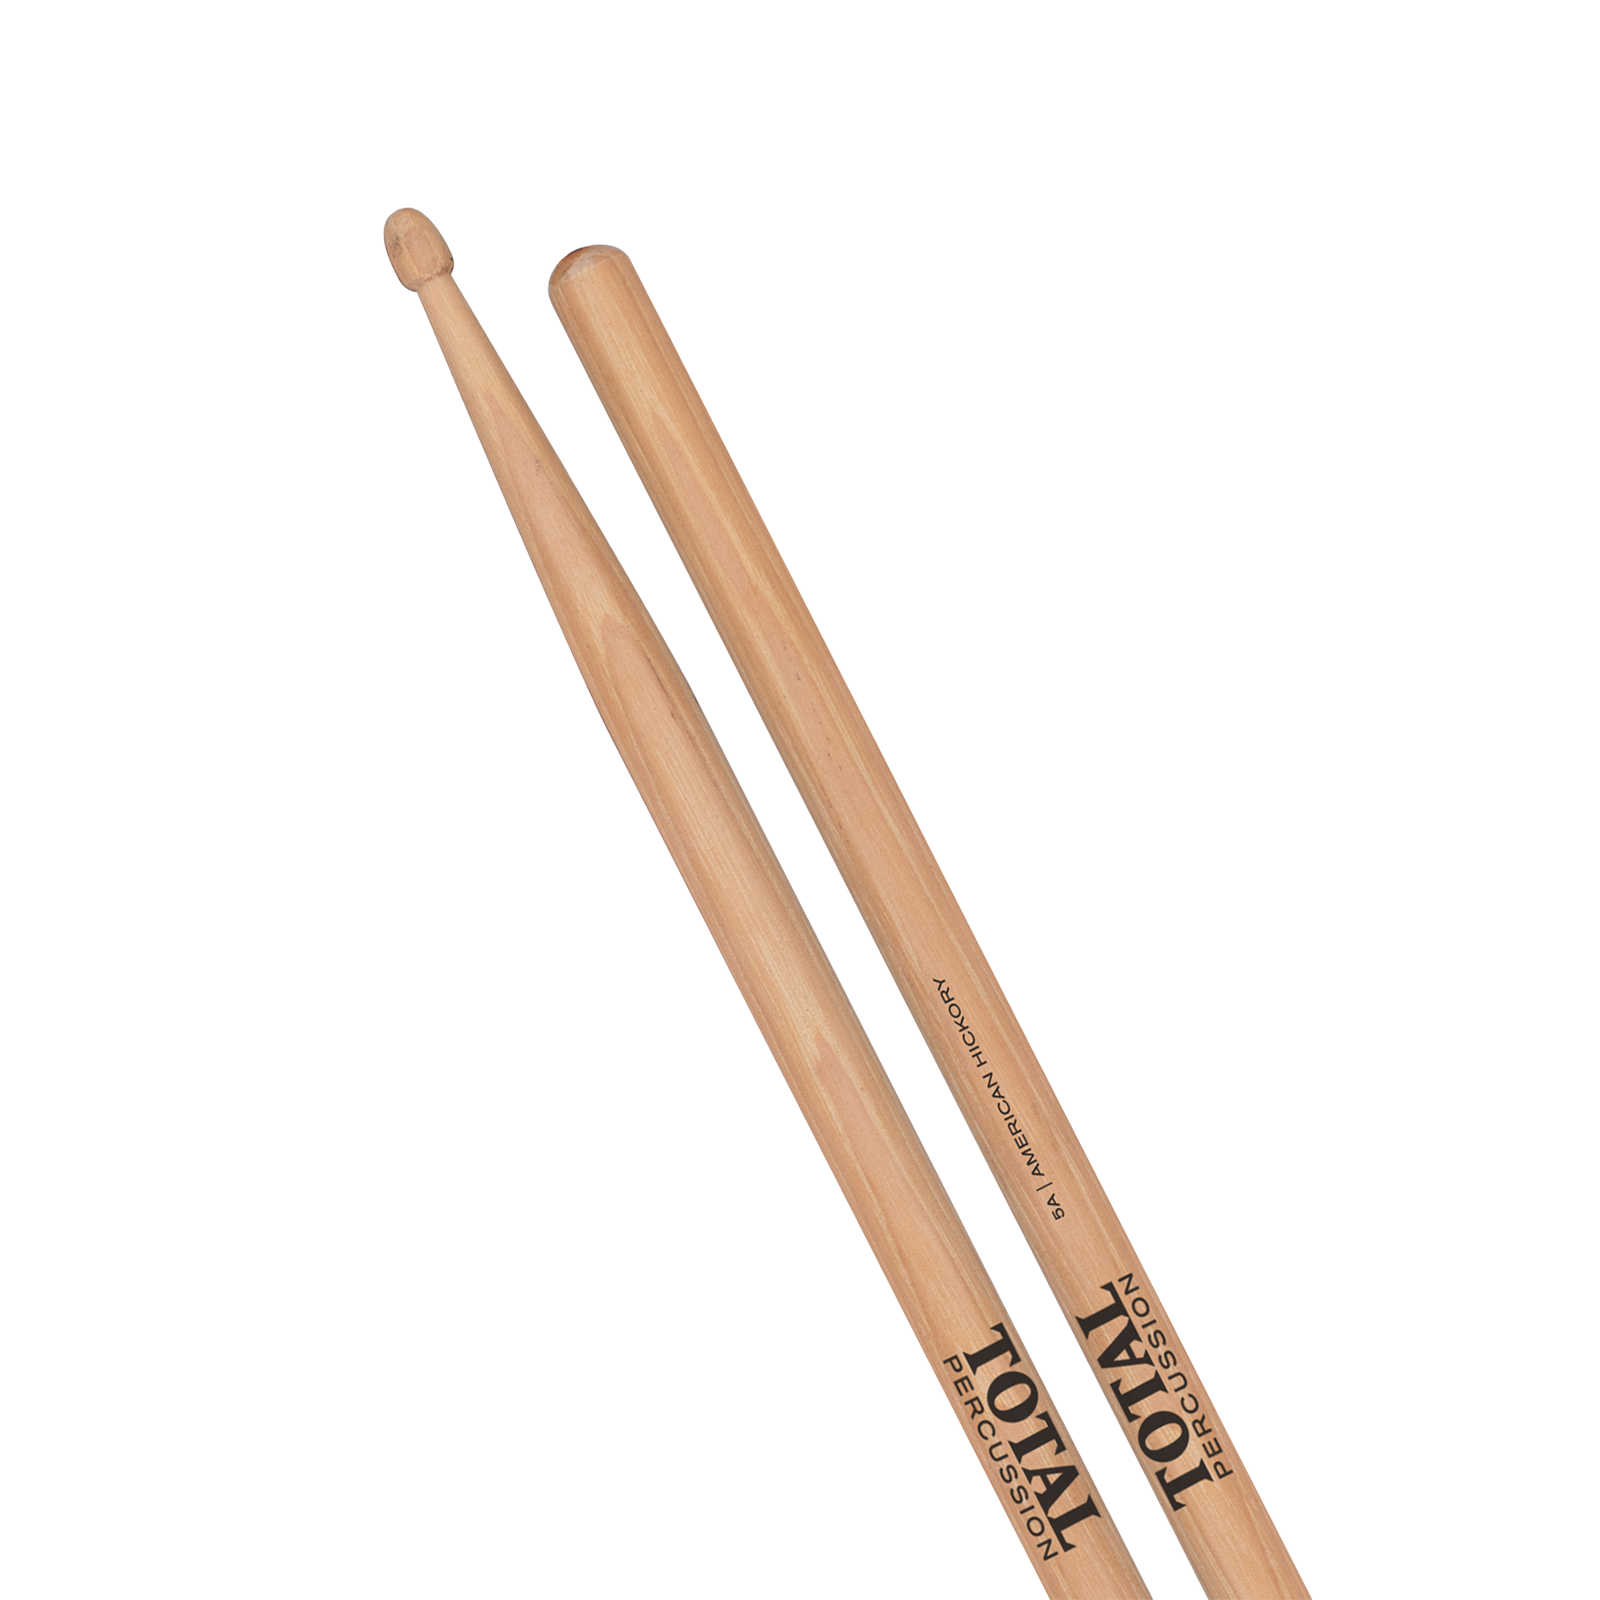 Total Percussion 5A Wood Tip Natural